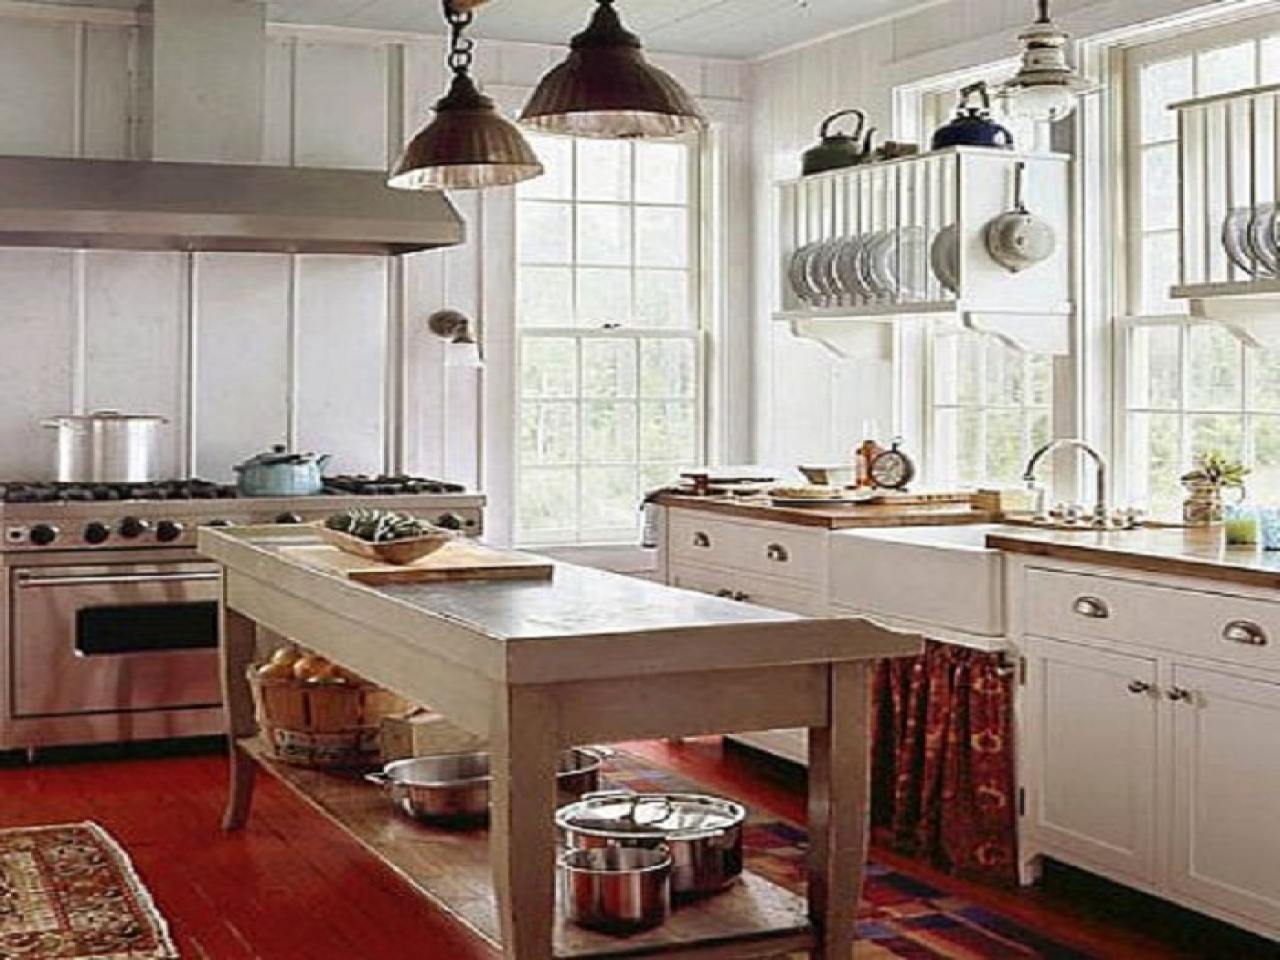 old french country kitchen photo - 4